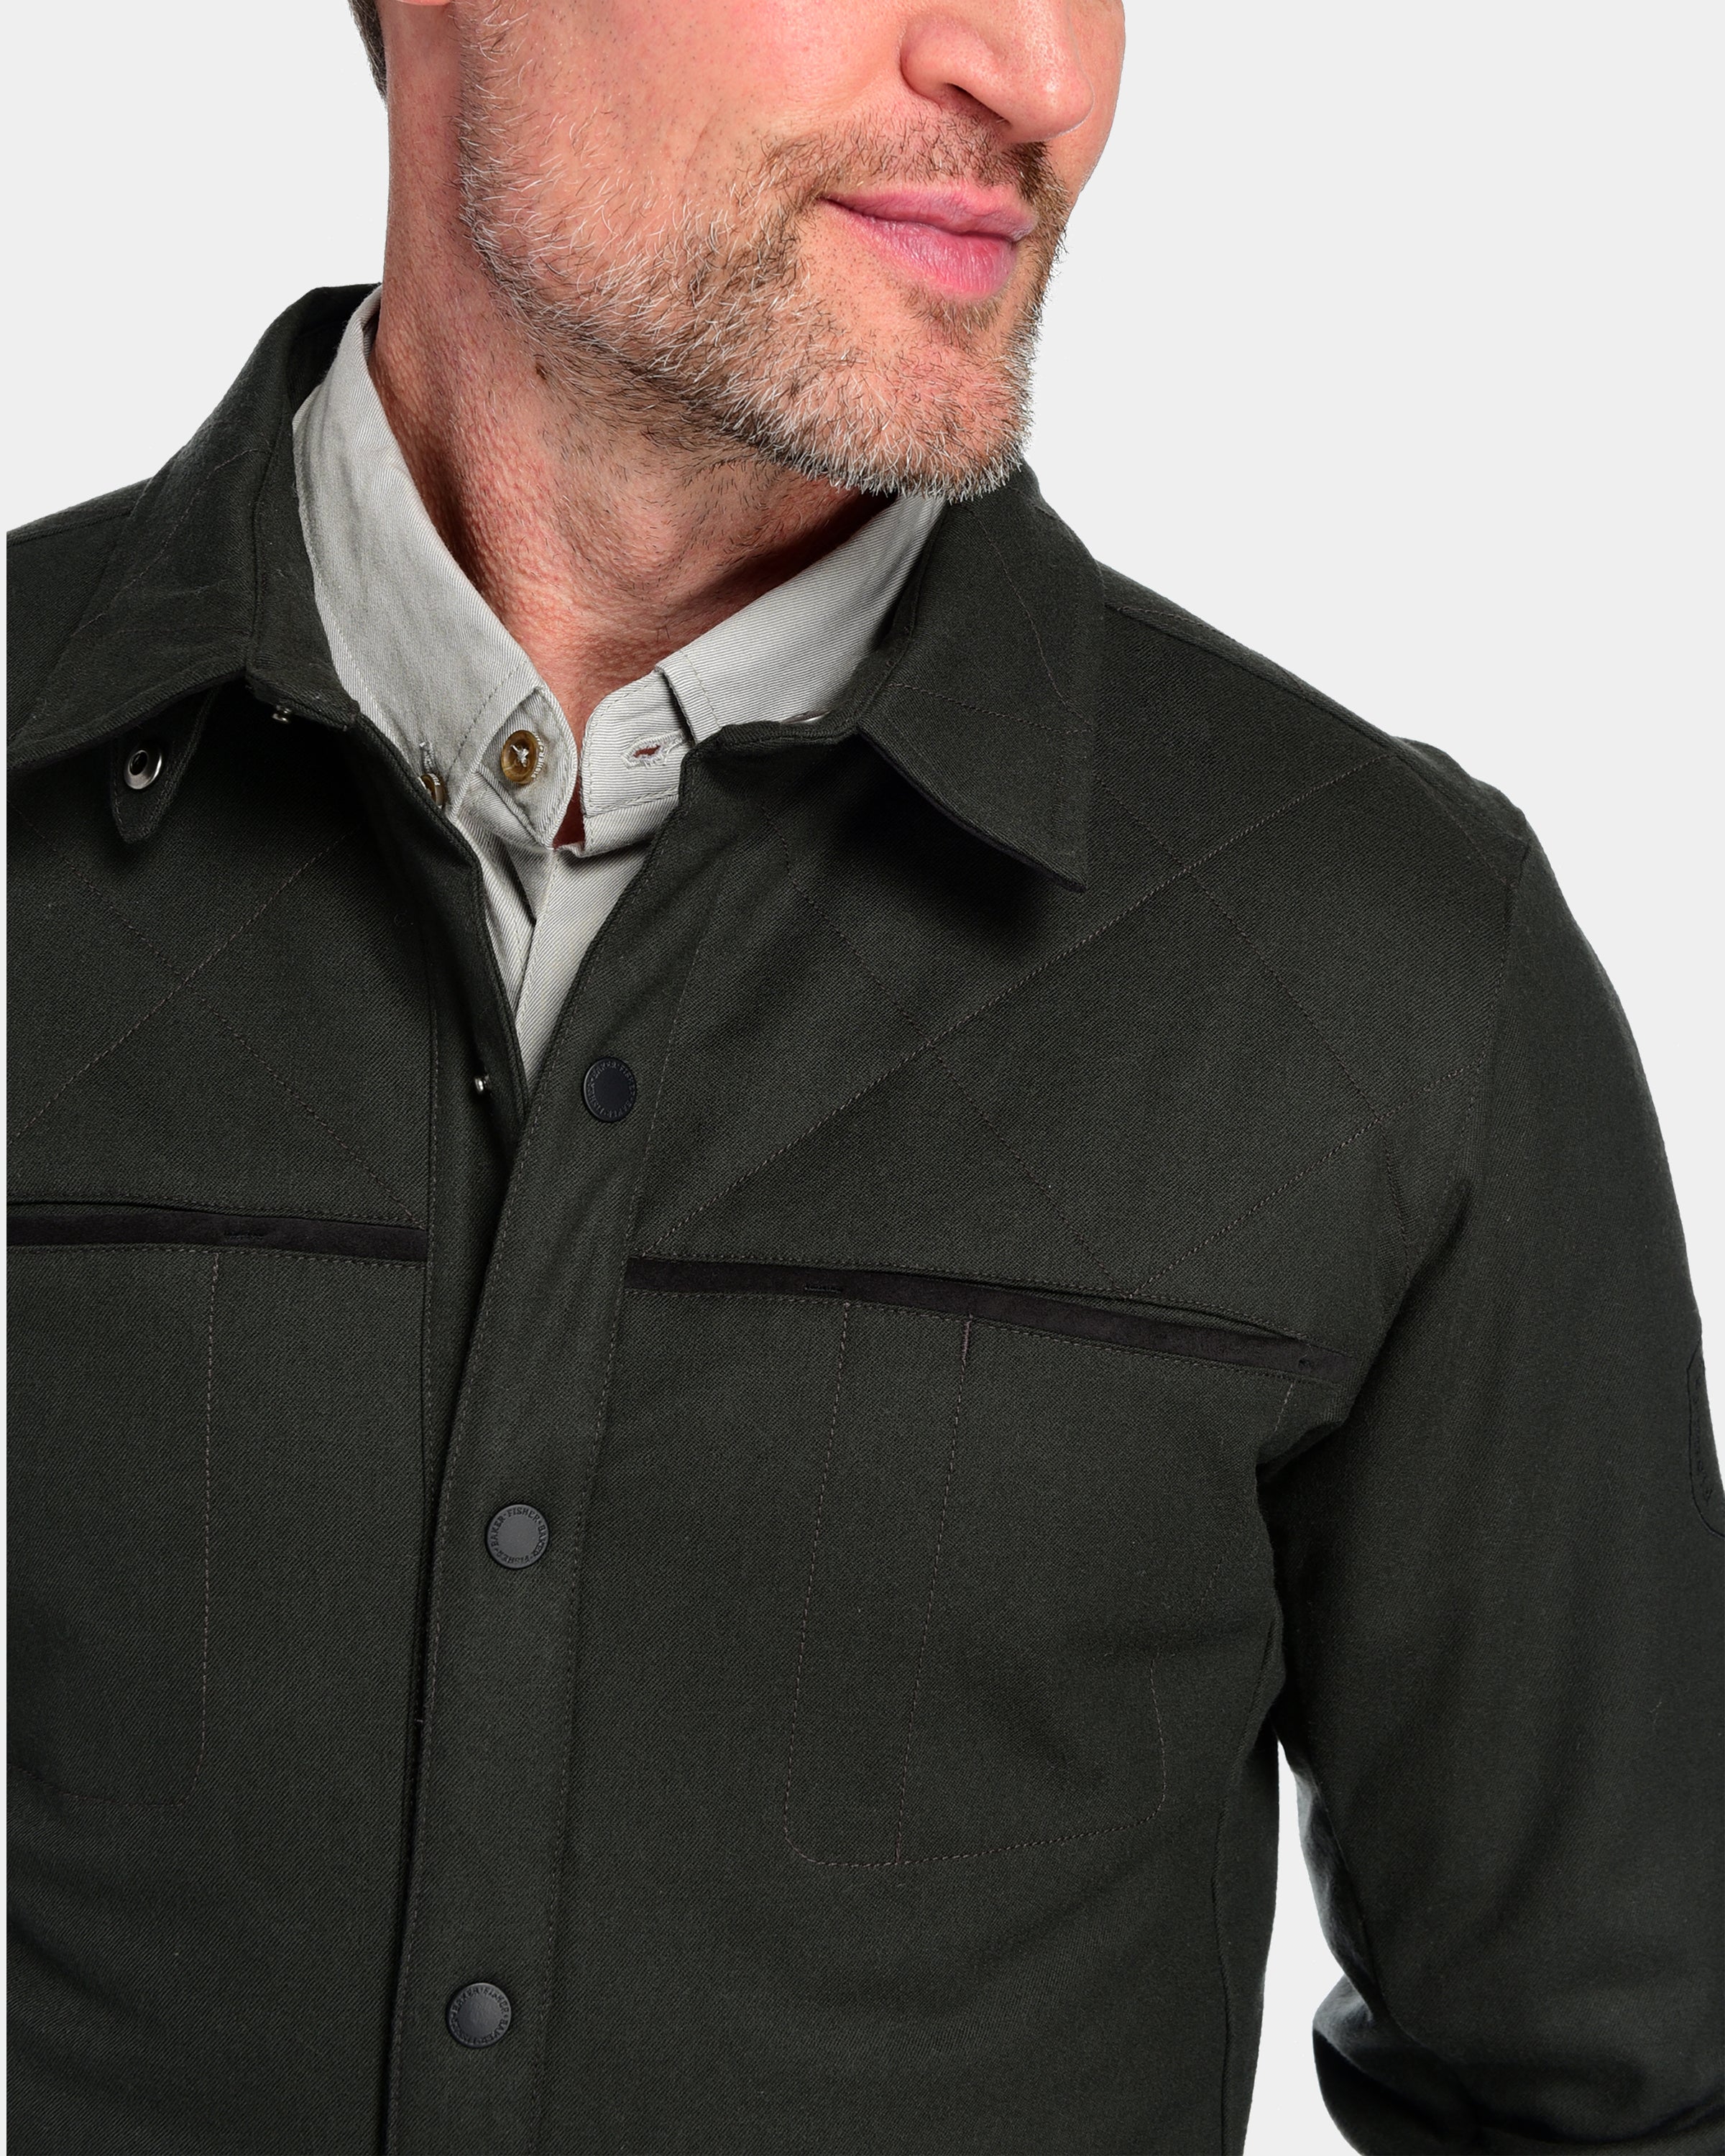 Men's Insulated CPO Jacket the Birmingham CPO Jacket by Fisher + Baker